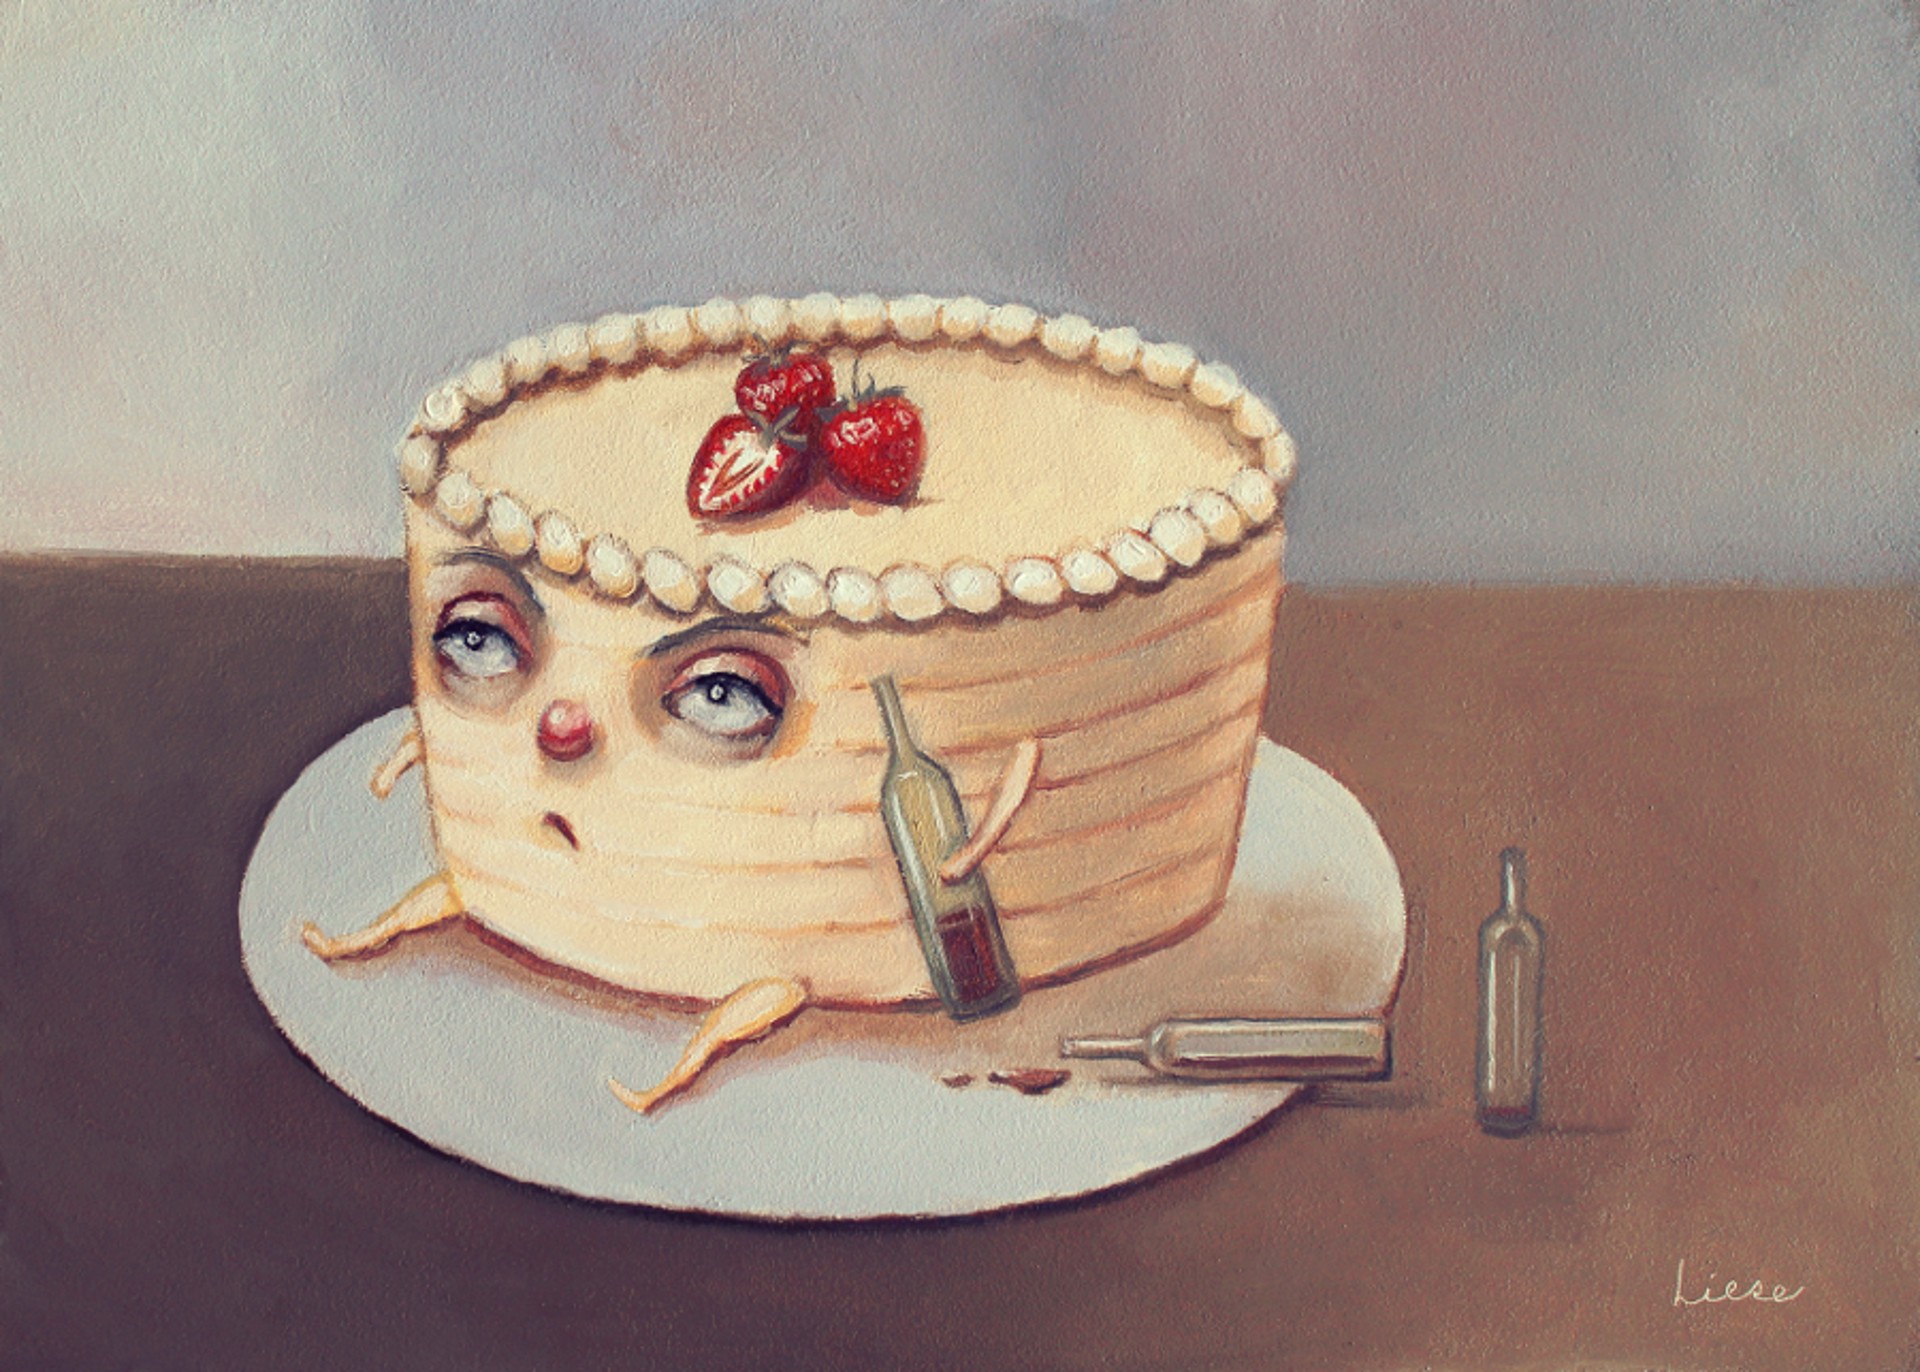 Rumcake (Giclee on Deckled Paper) G.O. by Liese Chavez